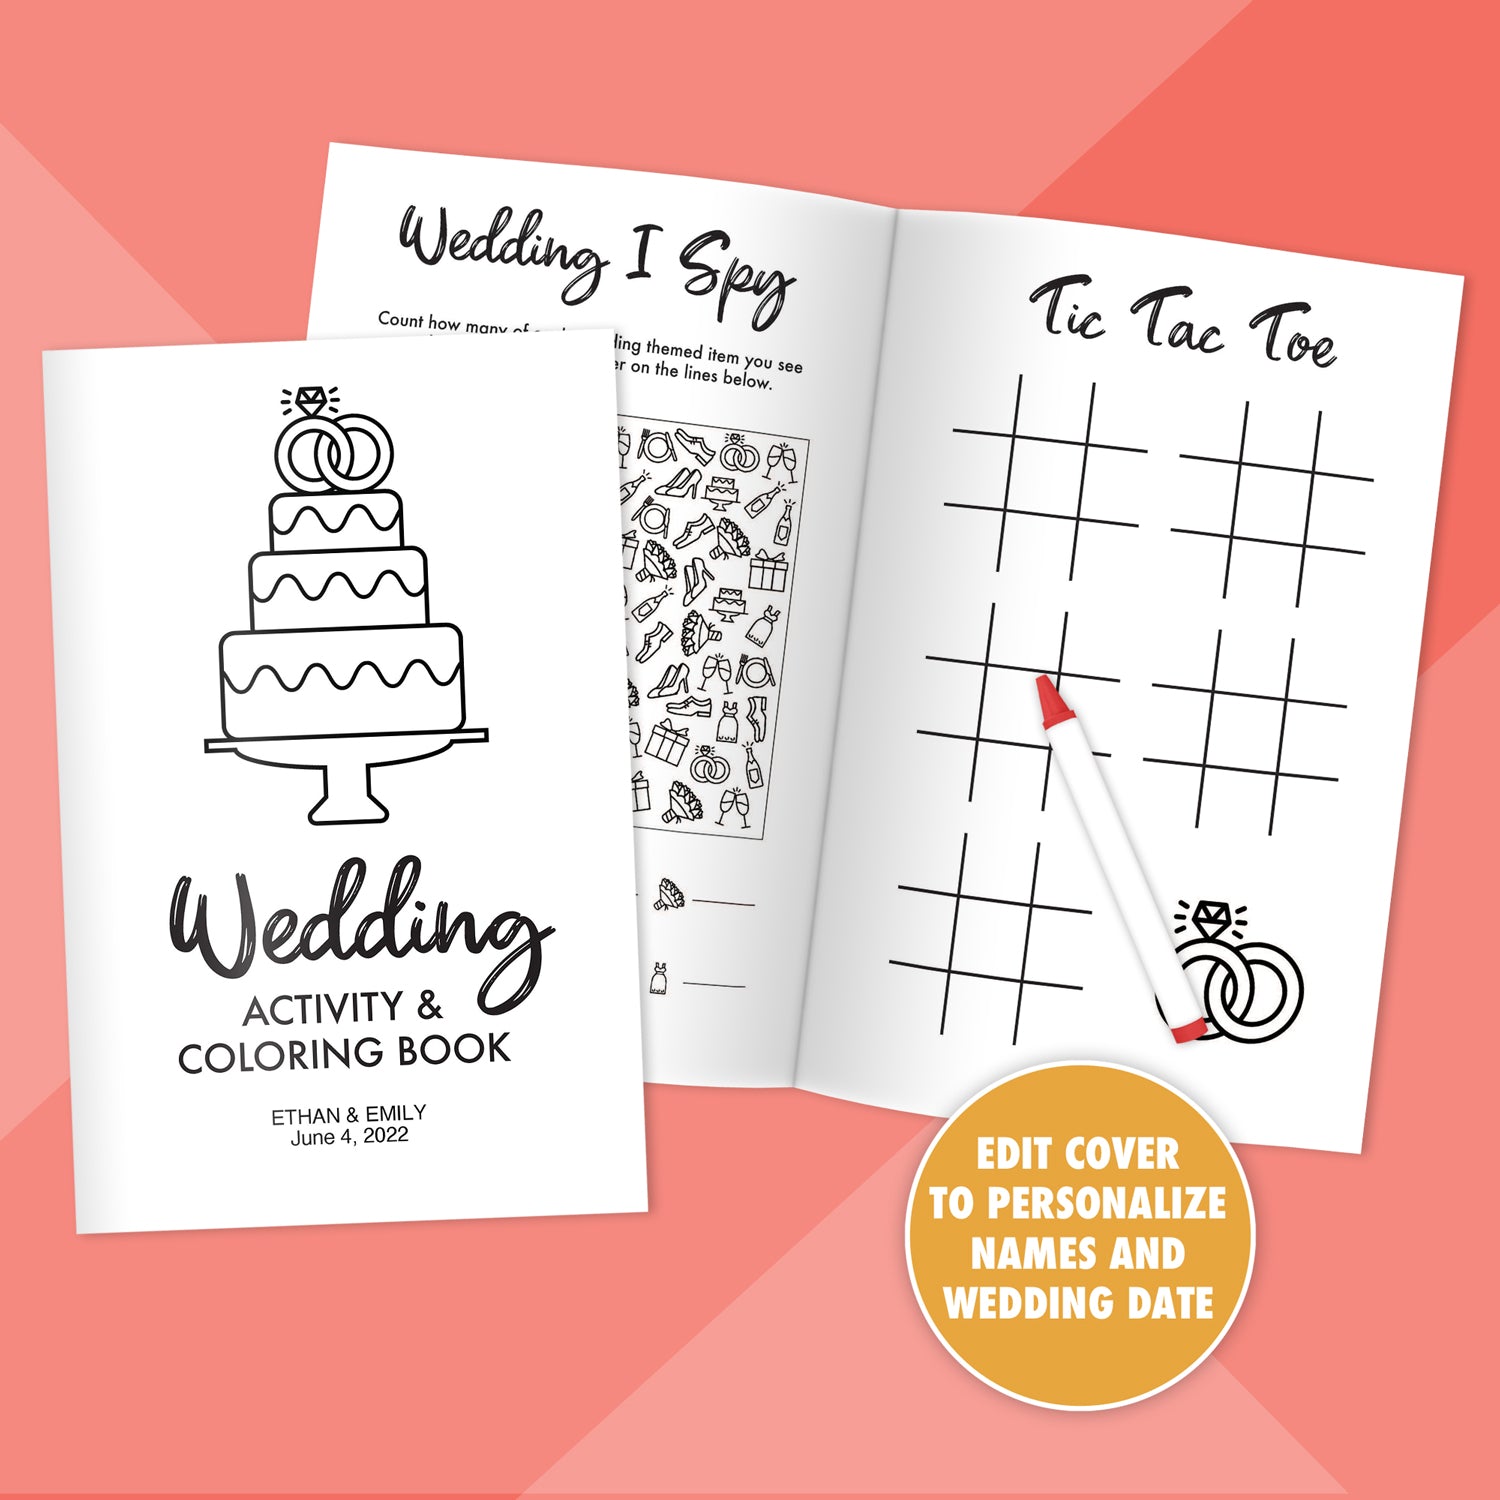 Printable Wedding Activity and Coloring Book - Editable Cover